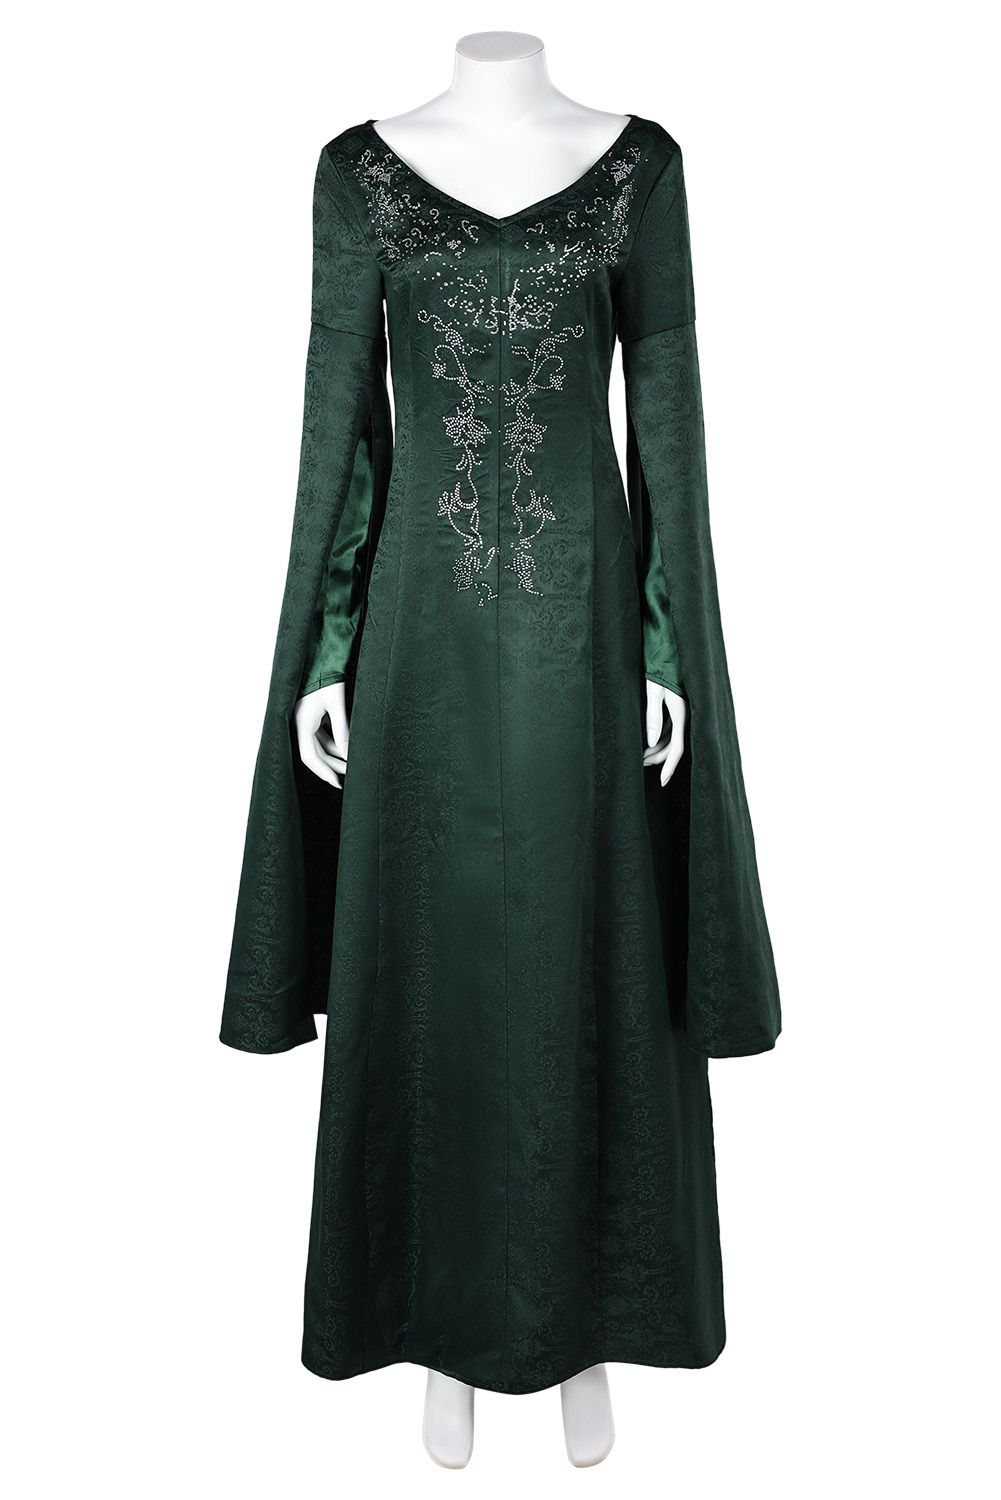 TV House of the Dragon Season 2 Alicent Hightower Green Jacquard Dress Outfits Halloween Carnival Suit Cosplay Costume